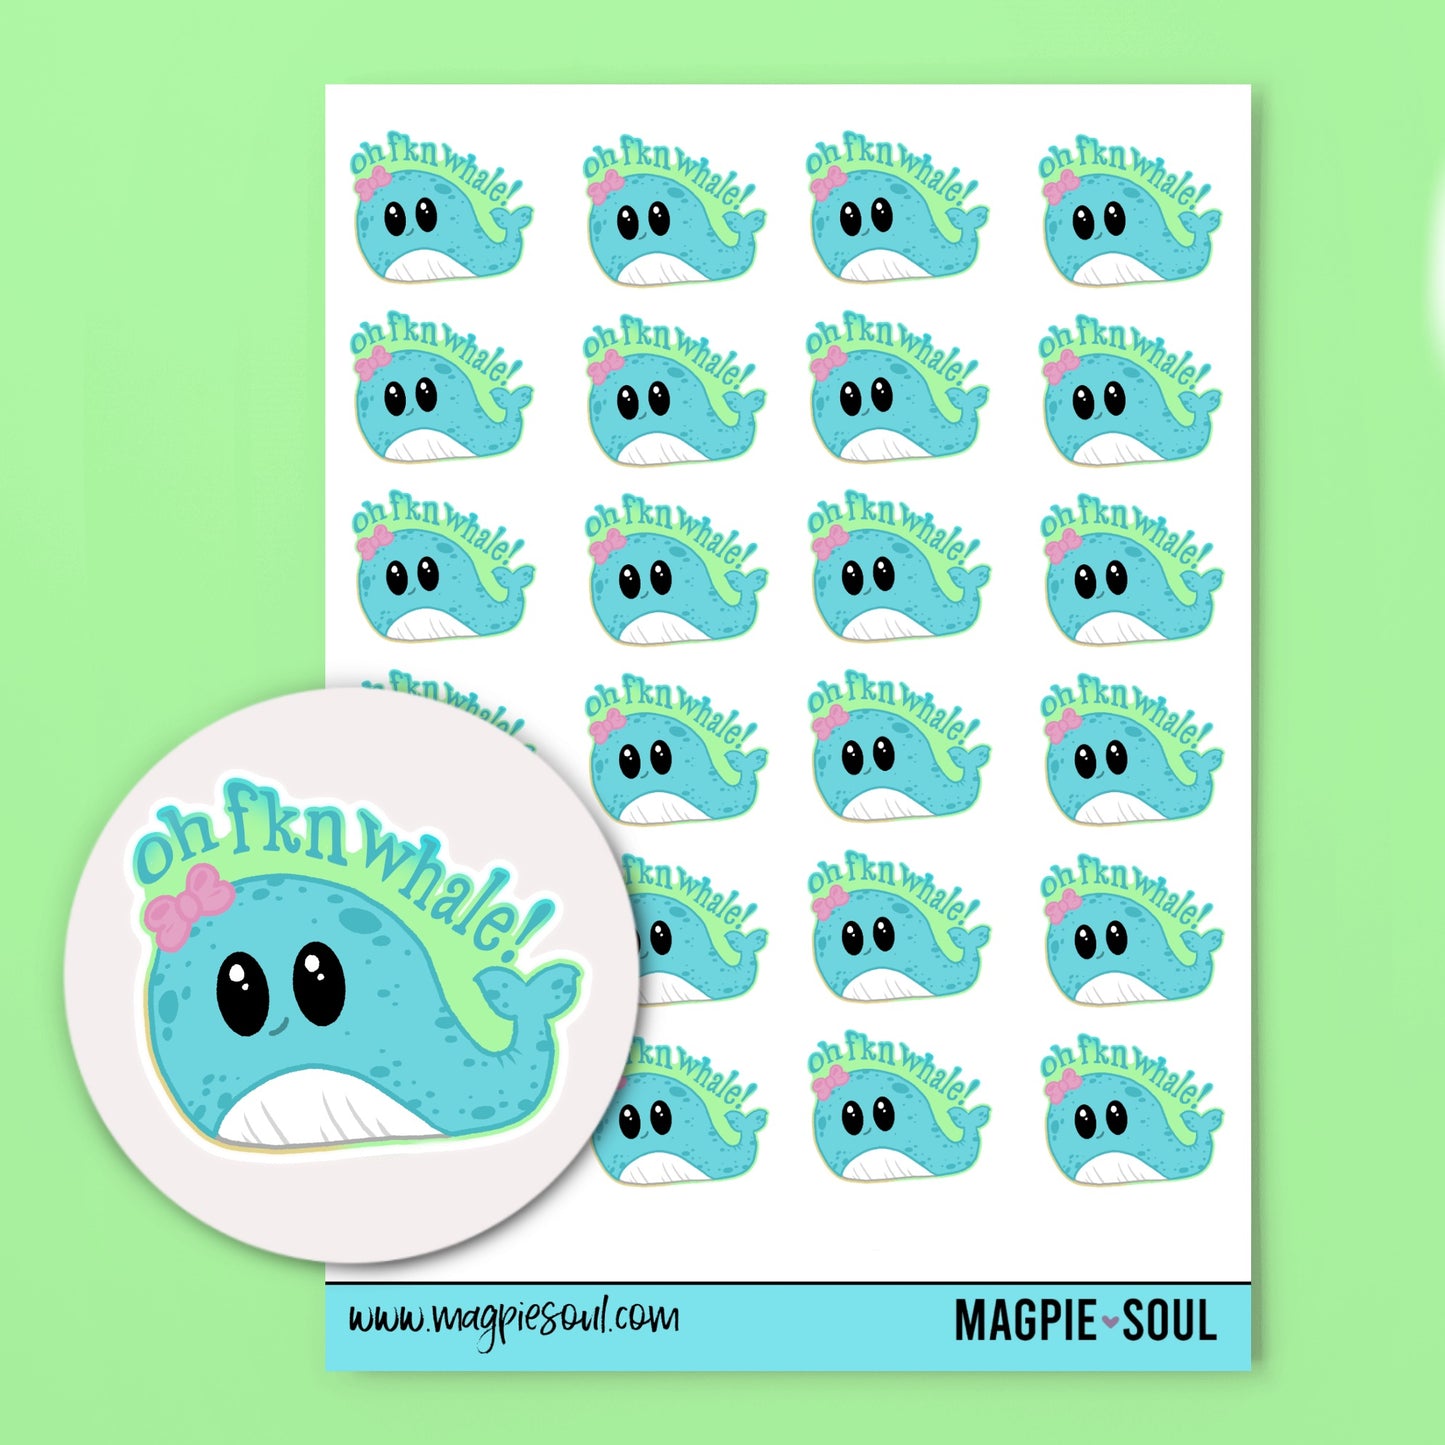 Oh Fkn Whale! Planner Stickers